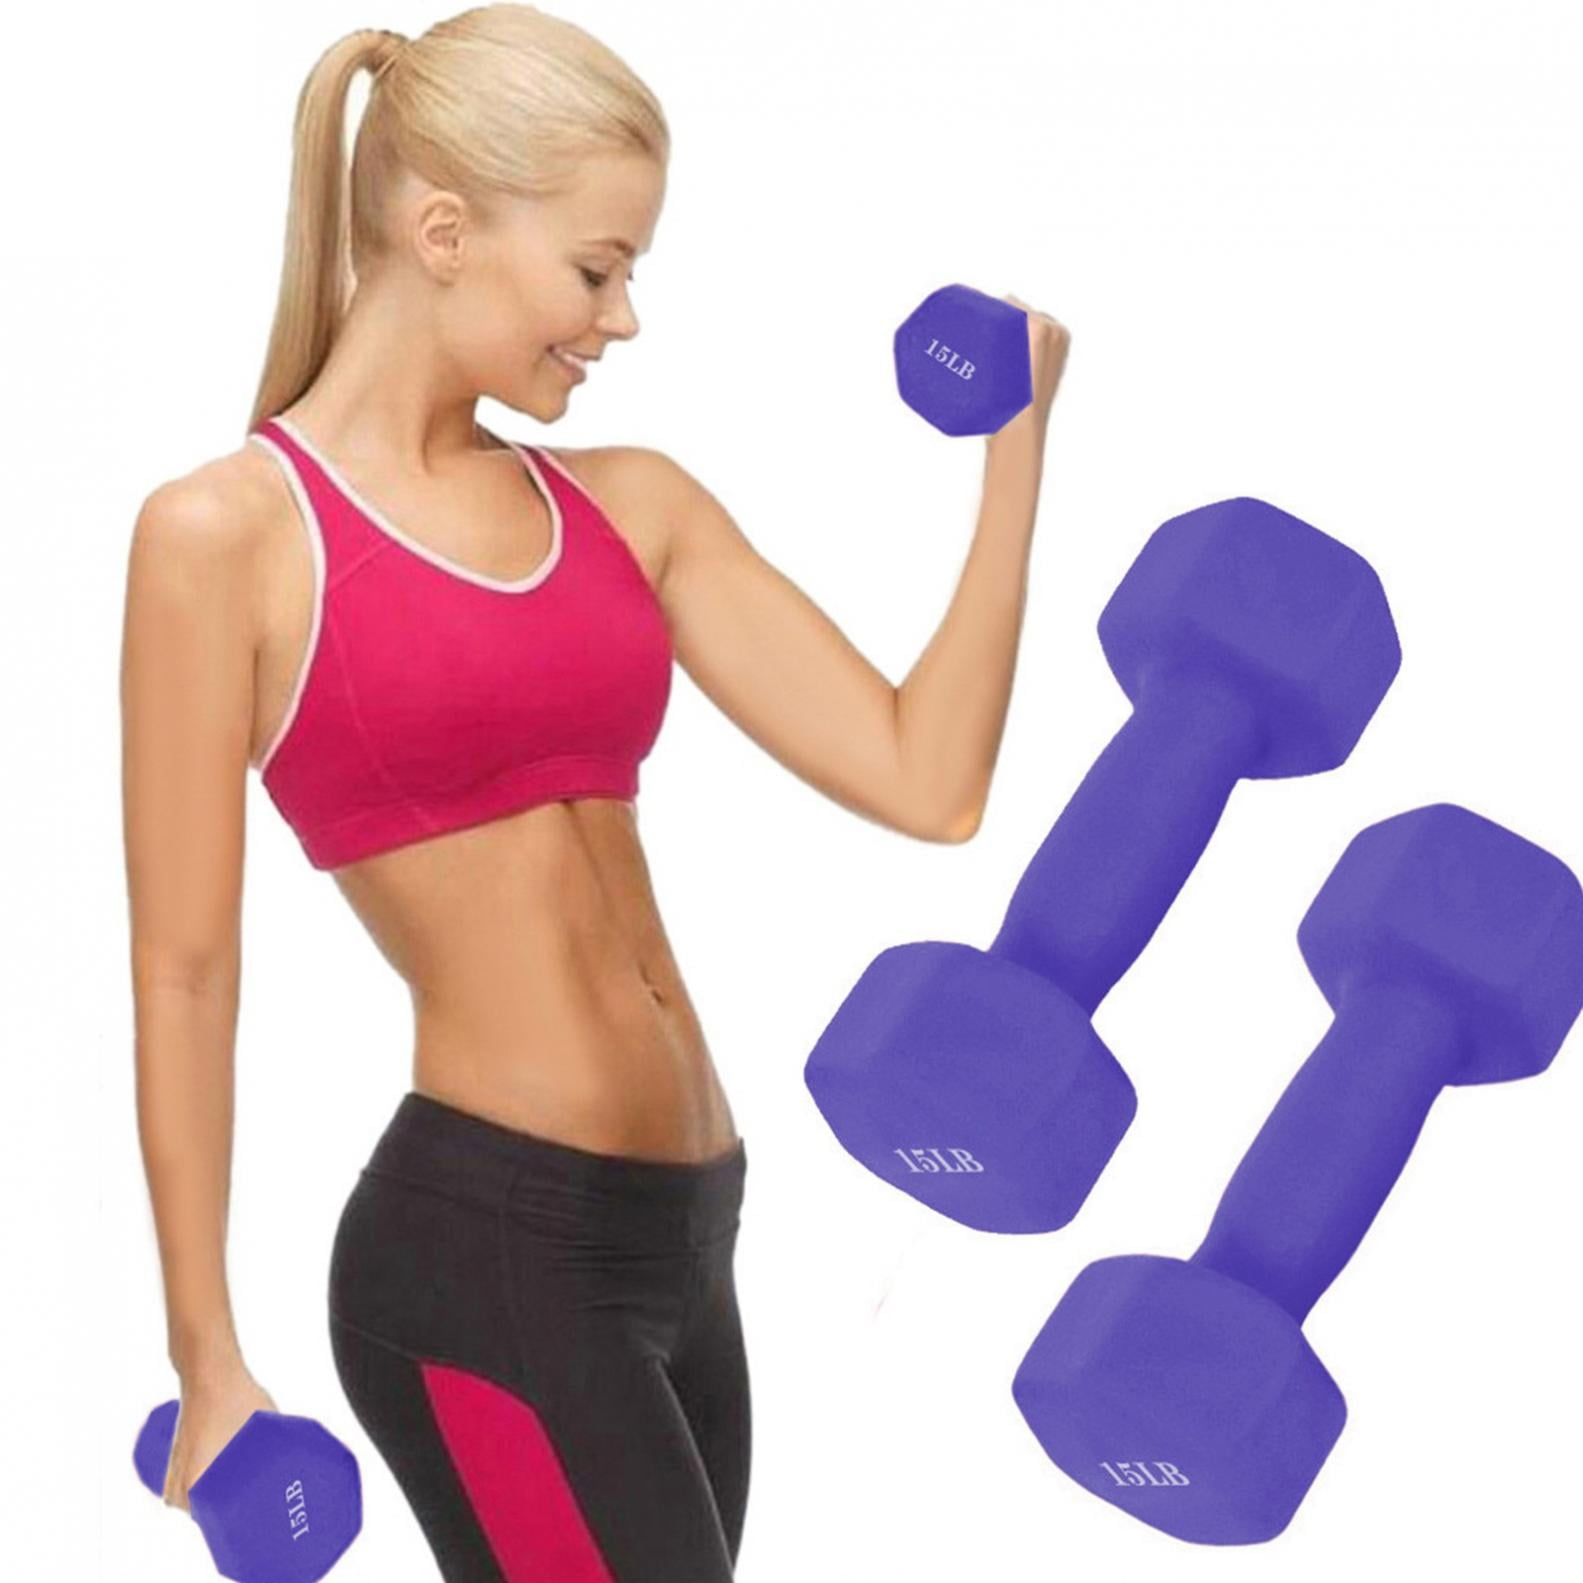 15 lb Neoprene Dumbbell Weight Lifting Fat Burning Home Gym Muscle Fitness New 